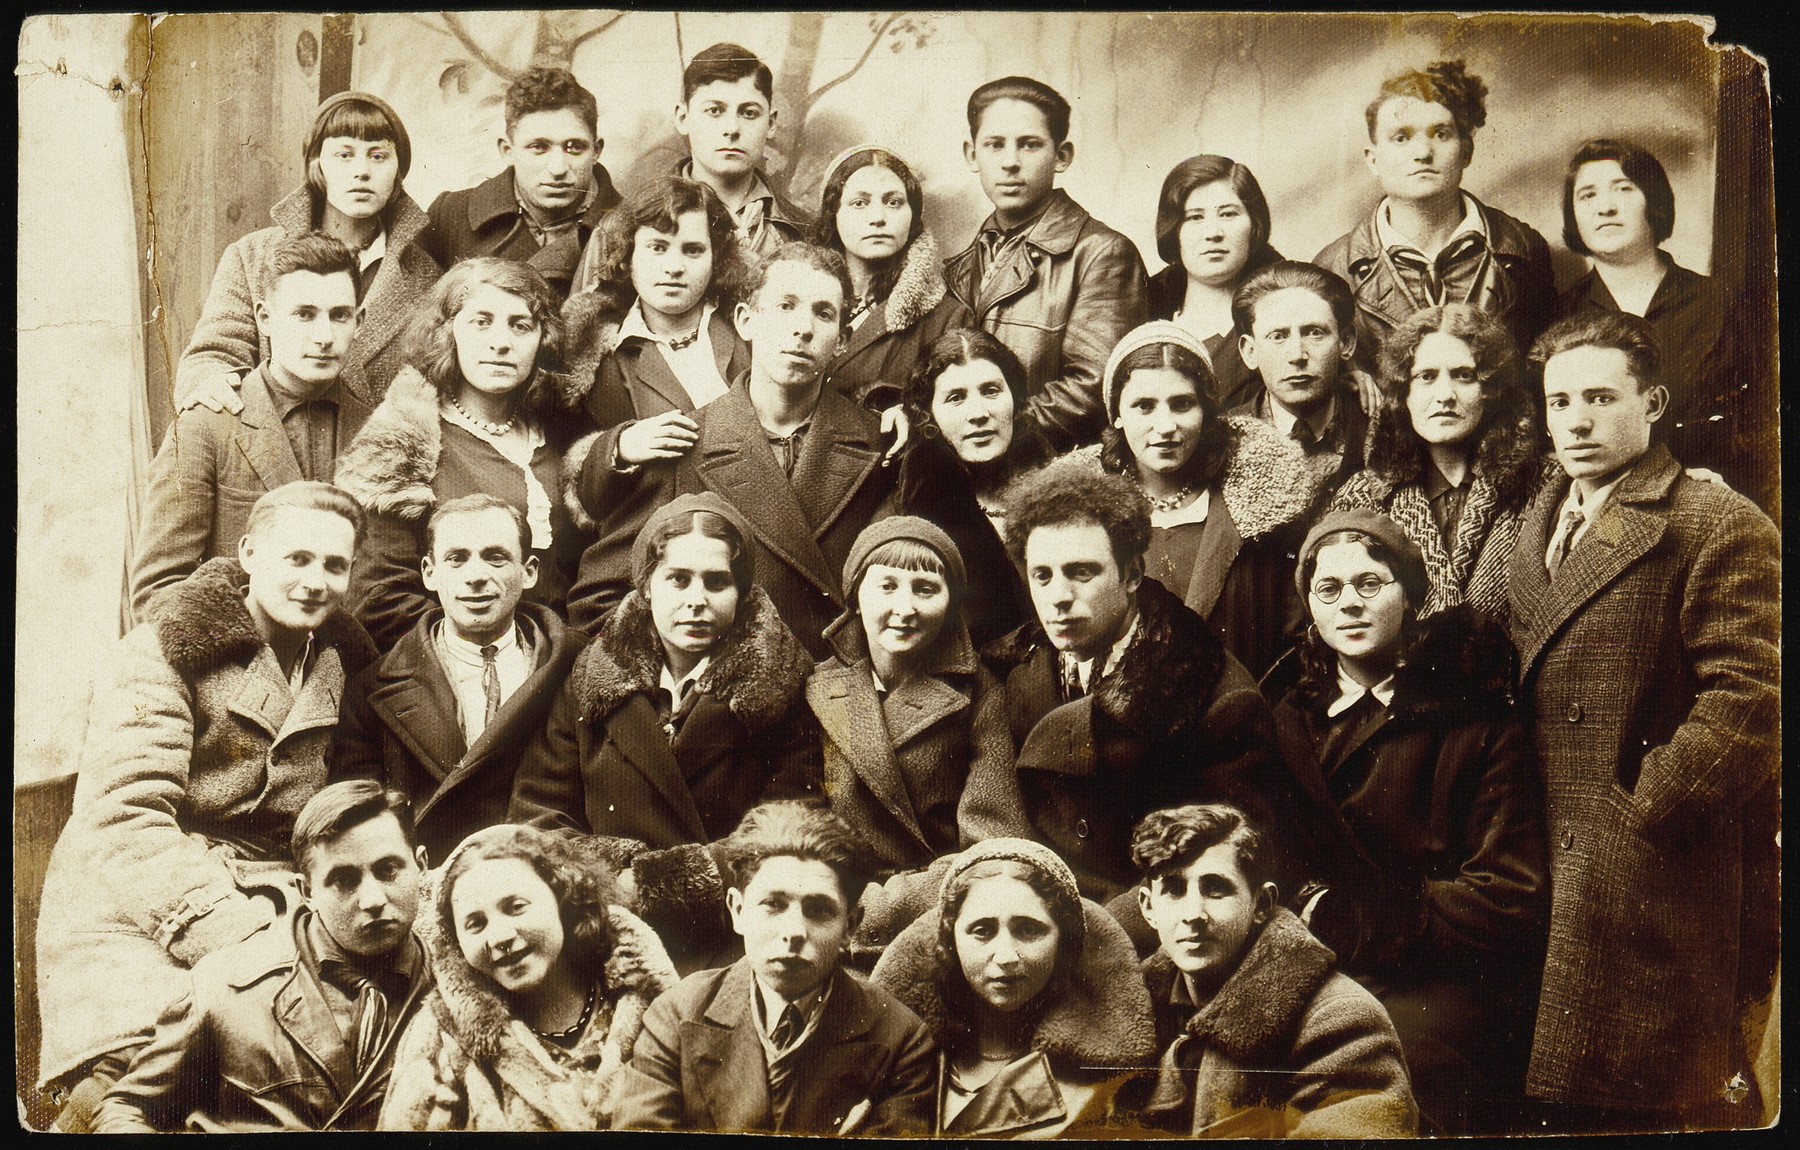 Group portrait of members of the Zionist youth movement, Hashomer Hatzair, from Eisiskes and surrounding towns.  
  
Among those pictured are: back row, right to left: Hinde Gutlevski, visitor, Reshke Gutlevski, visitor, Kreinke Bichwid, Muni Zahavi, Bichwid (sister of Kreinke); second row from the top, right to left:  Motke Burstein, Flora Kagan, Shmuel Berkowicz, unknown, Matikanski, unknown, Bichwid (first name unknown), Rina Lewinson, Hanan Polaczek; third row from the top, right to left: Etele Lubetski, visitor, Esther Katz Resnik, Miriam Koppelman Ruskin, Hayyim Streletski, unknown; front row, right to left: visitor from Olkeniki, Bavale Polaczek, visitor, Leipke Politacki, visitor.  

Muni Zahavi, Rina Lewinson, Shmuel Berkowicz, and Bavale Polaczek immigrated to Palestine. Feige (Flora) Kagan and Esther Katz Resnik also survived. All the others are believed to have ben murdered during the Holocaust.